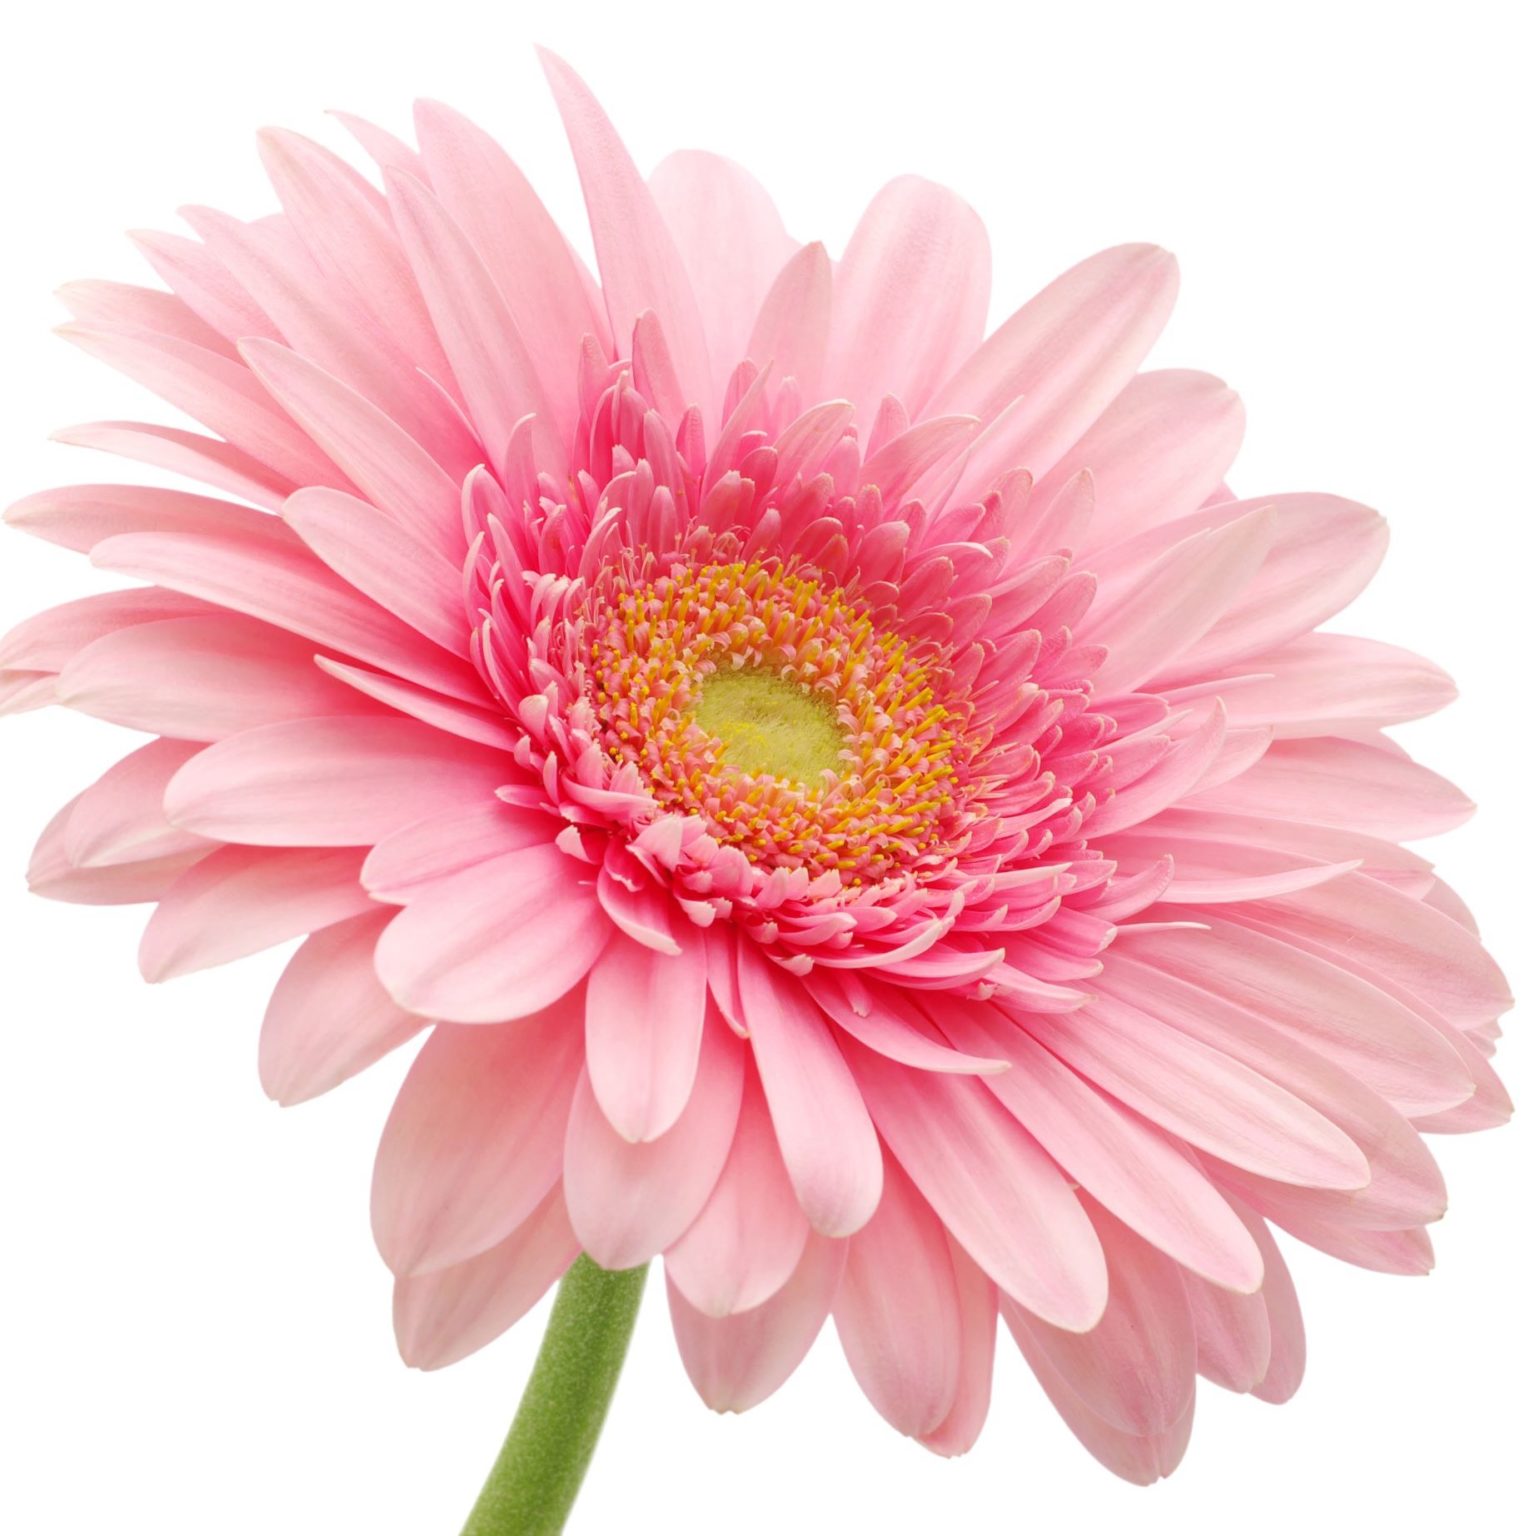 Spring’s Gorgeous Pastel Flowers - Allan's Flowers & More